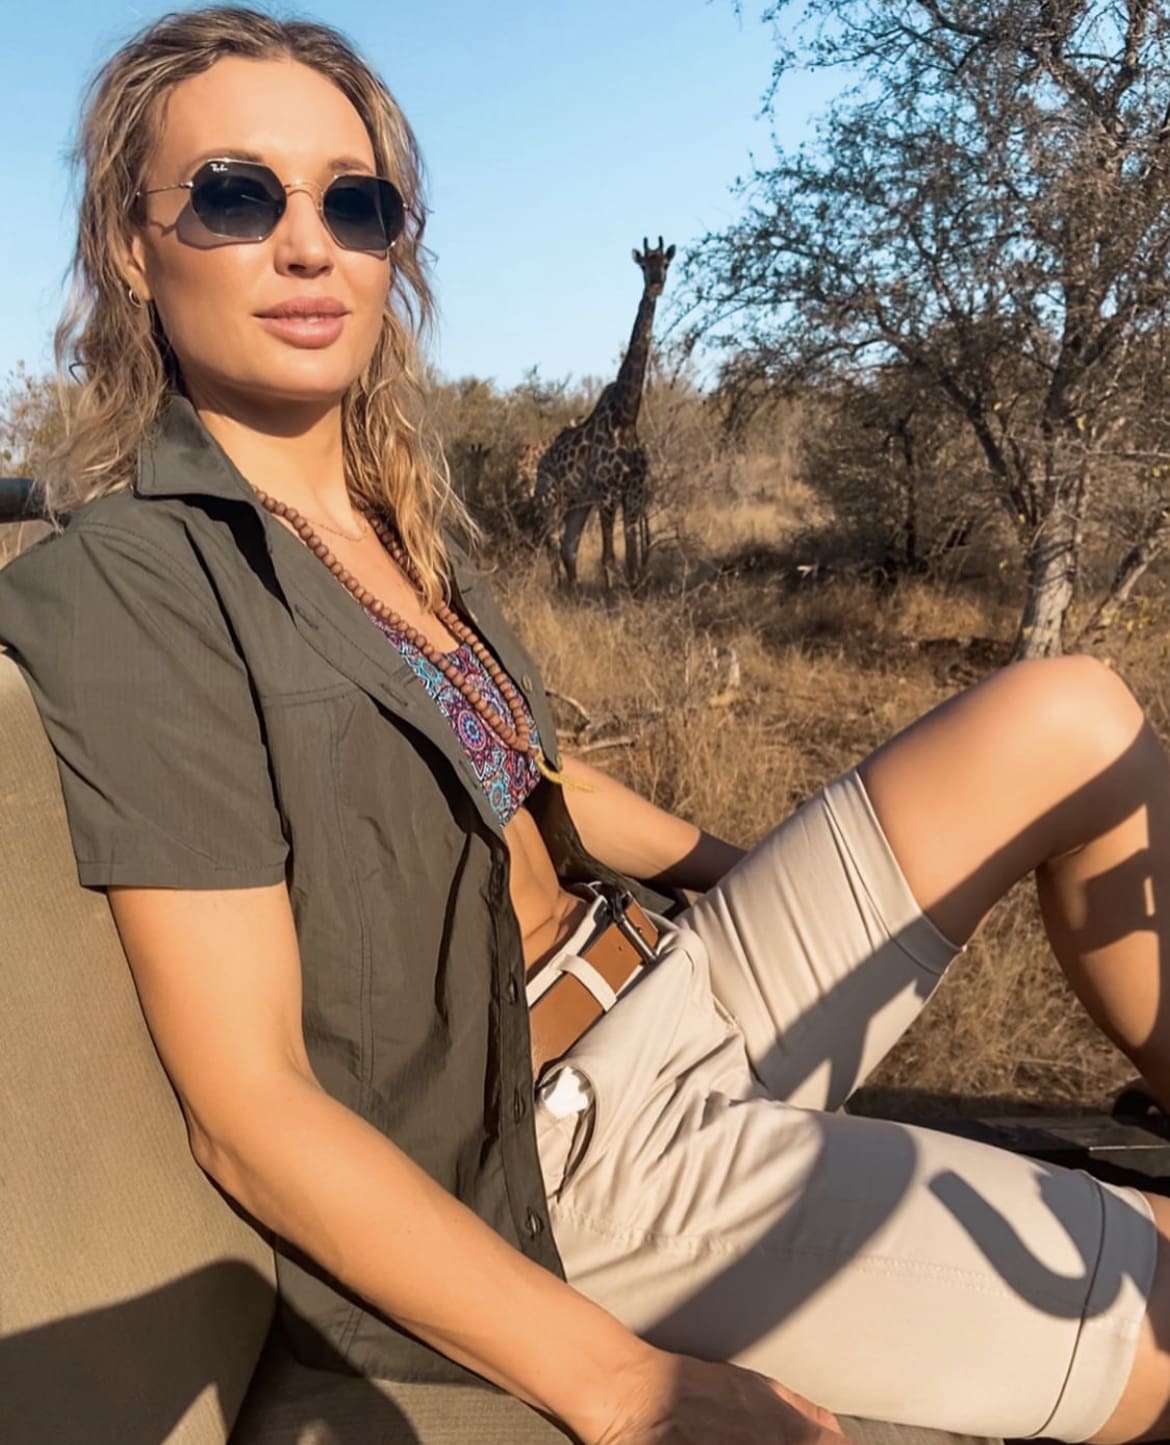 Woman showing off her safari outfit in front of a giraffe